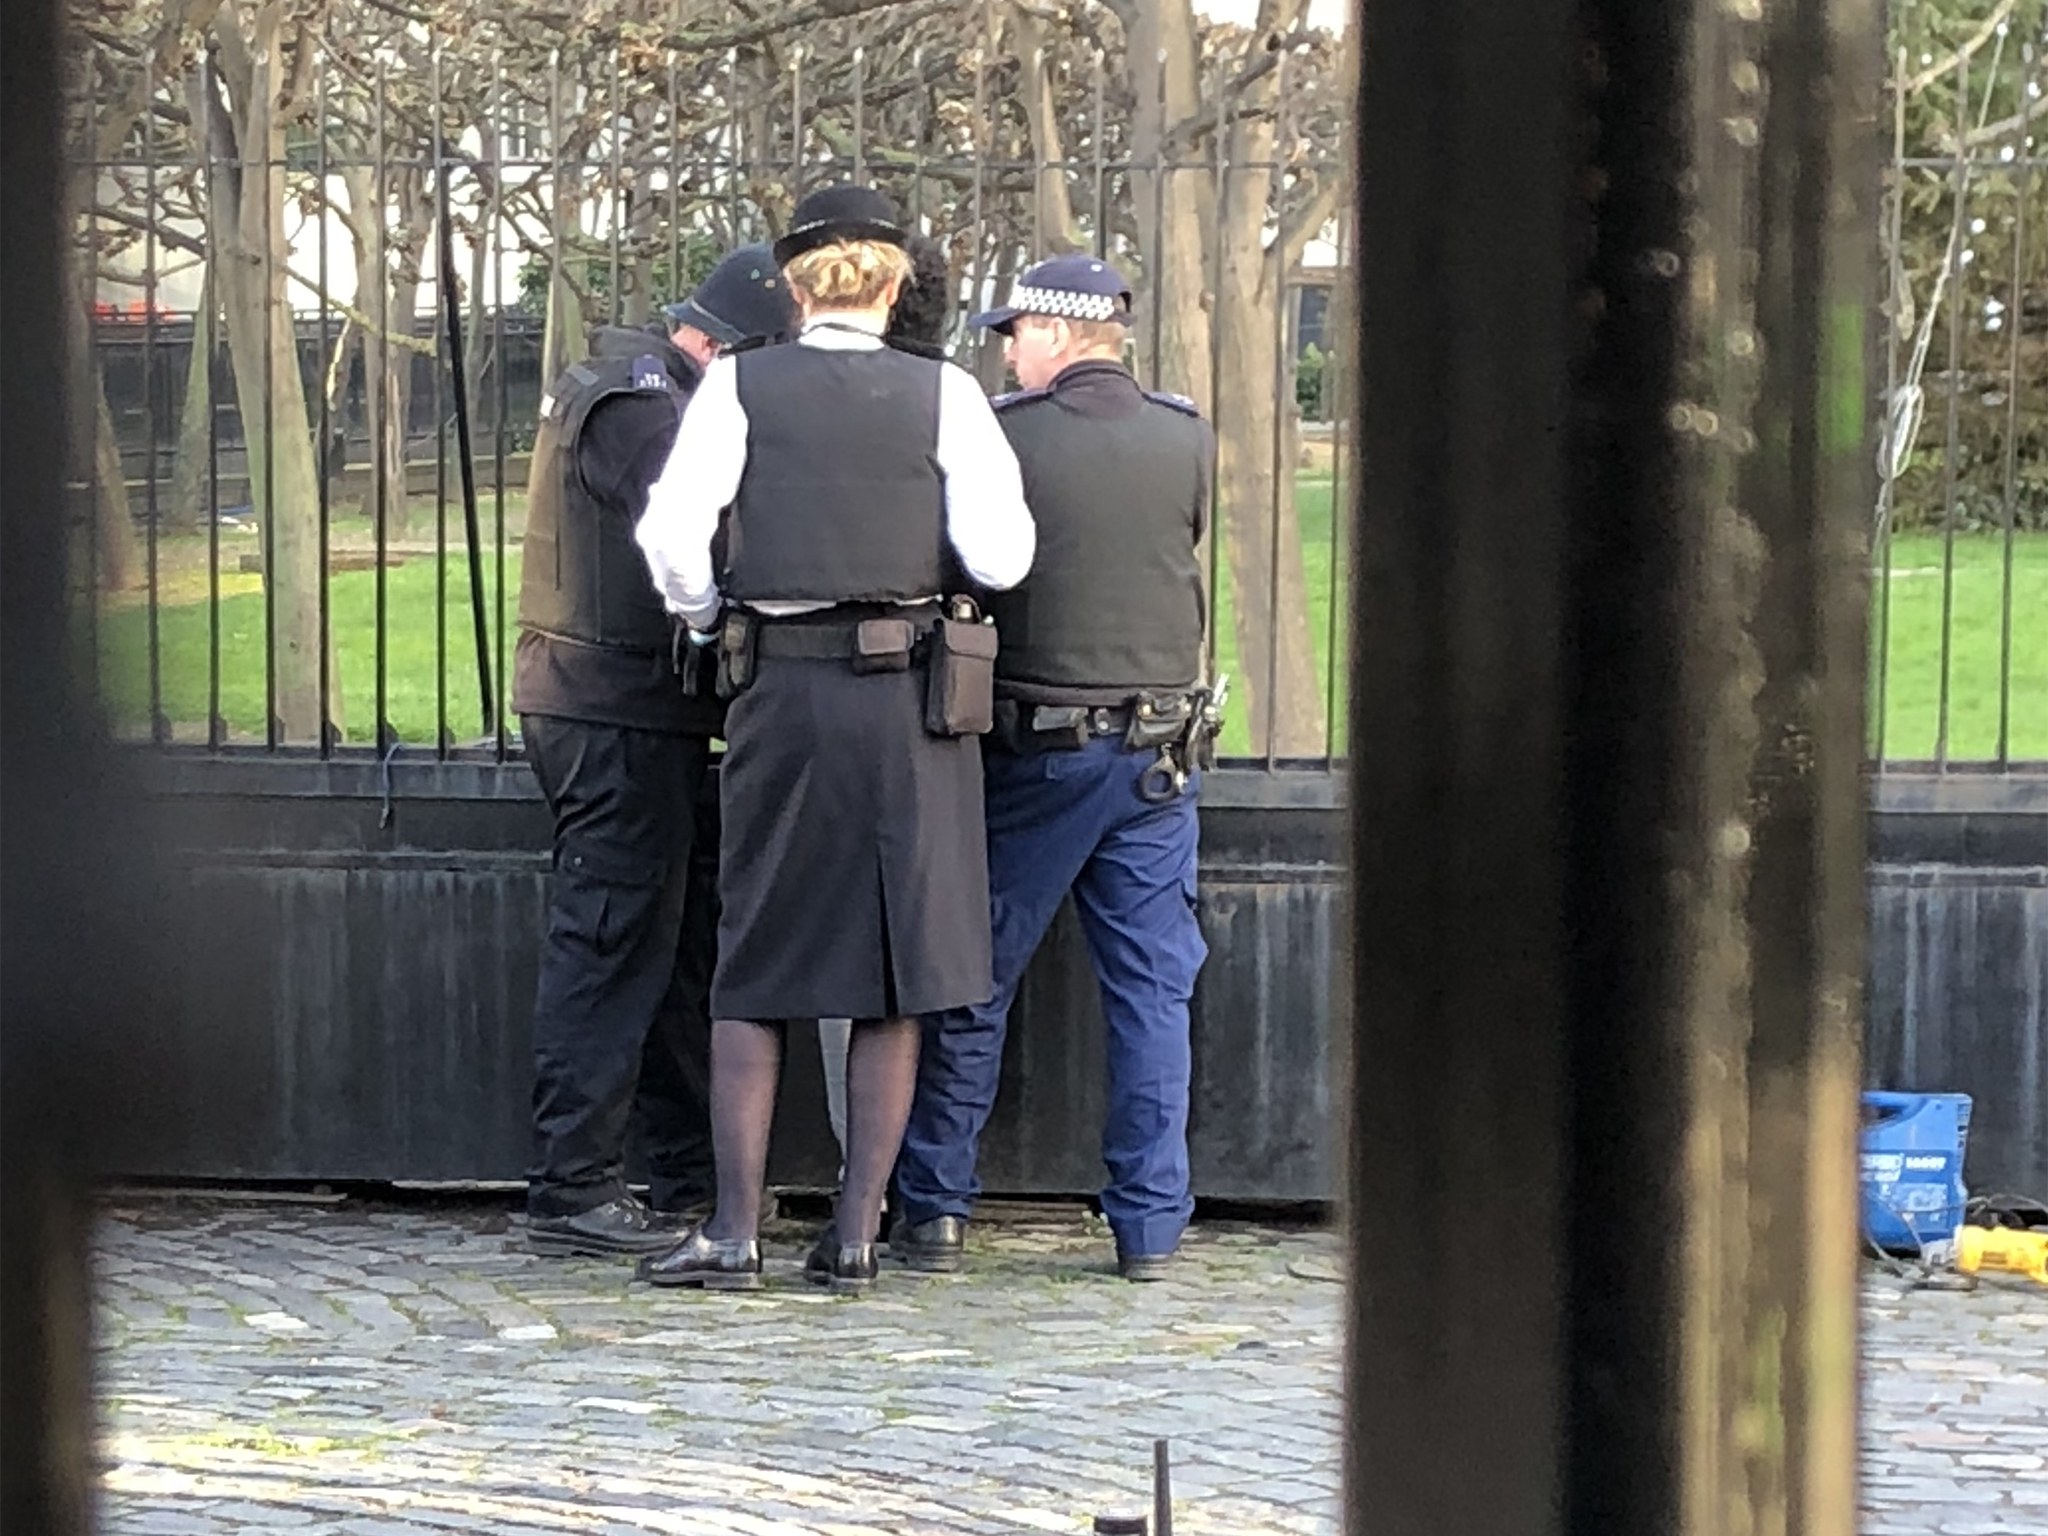 Suspect held inside Palace of Westminster